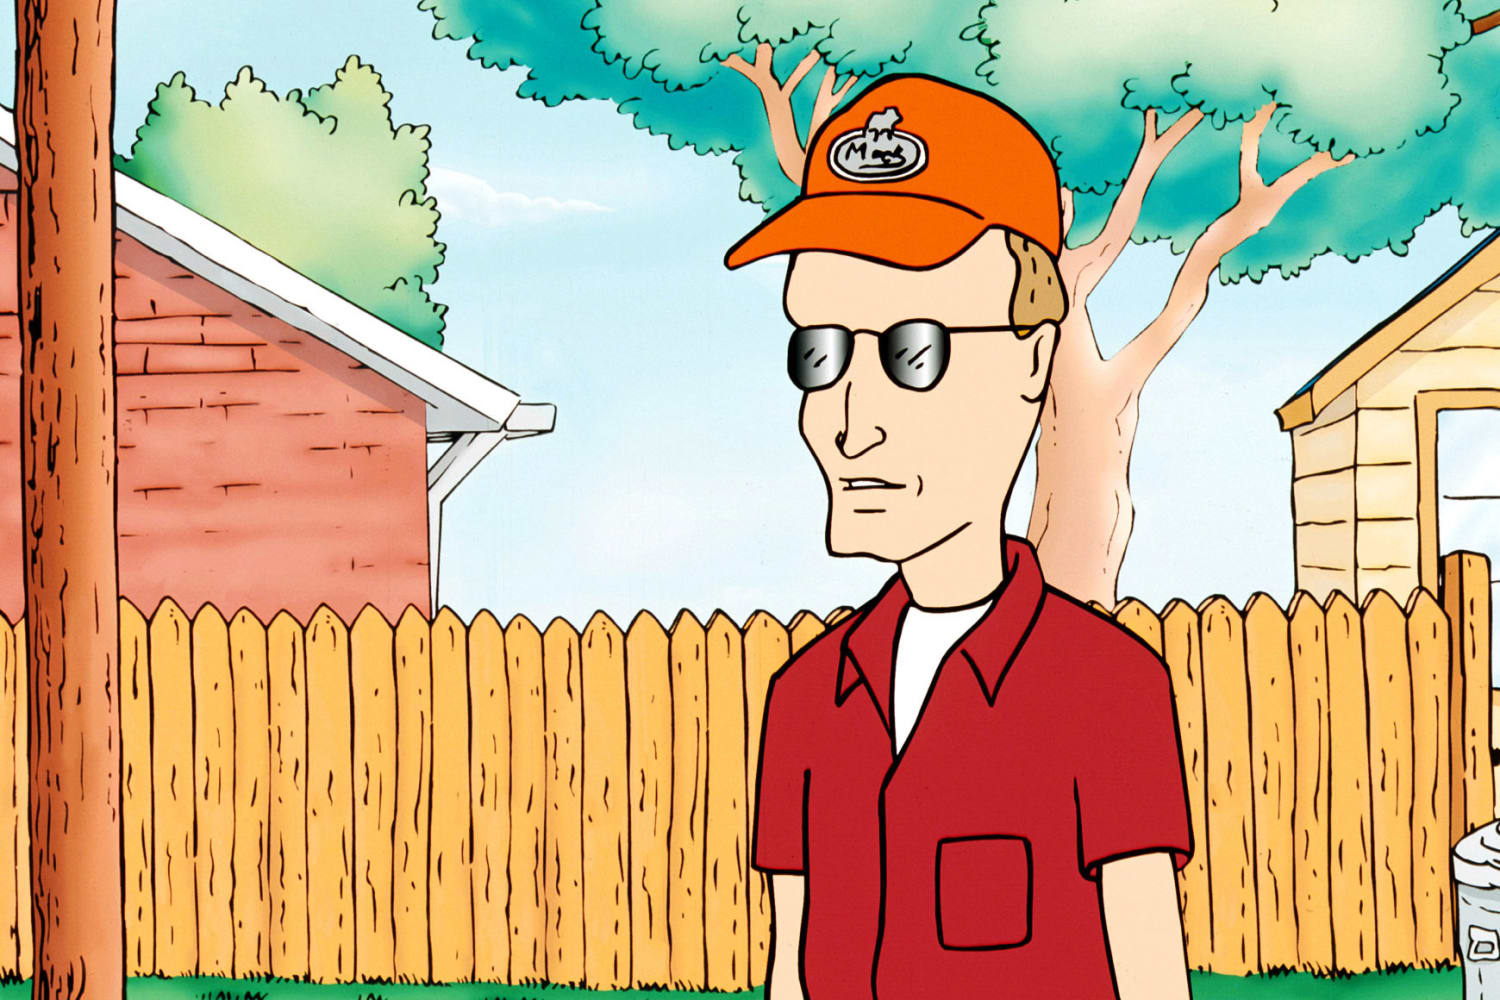 Dale voice actor Johnny Hardwick recorded new episodes for King of the Hill  reboot before his death